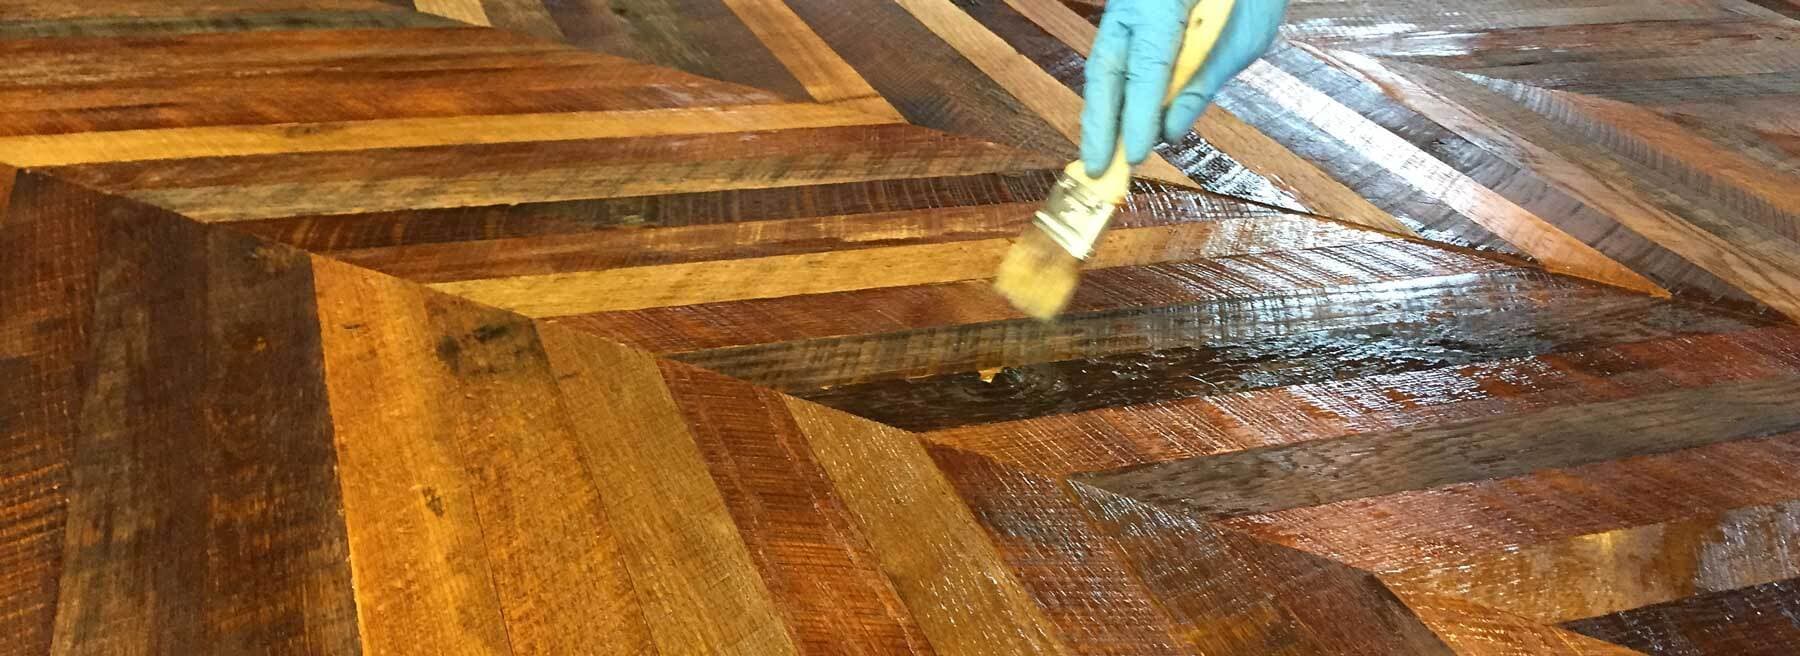 Staining chevron reclaimed wood for accent wall.